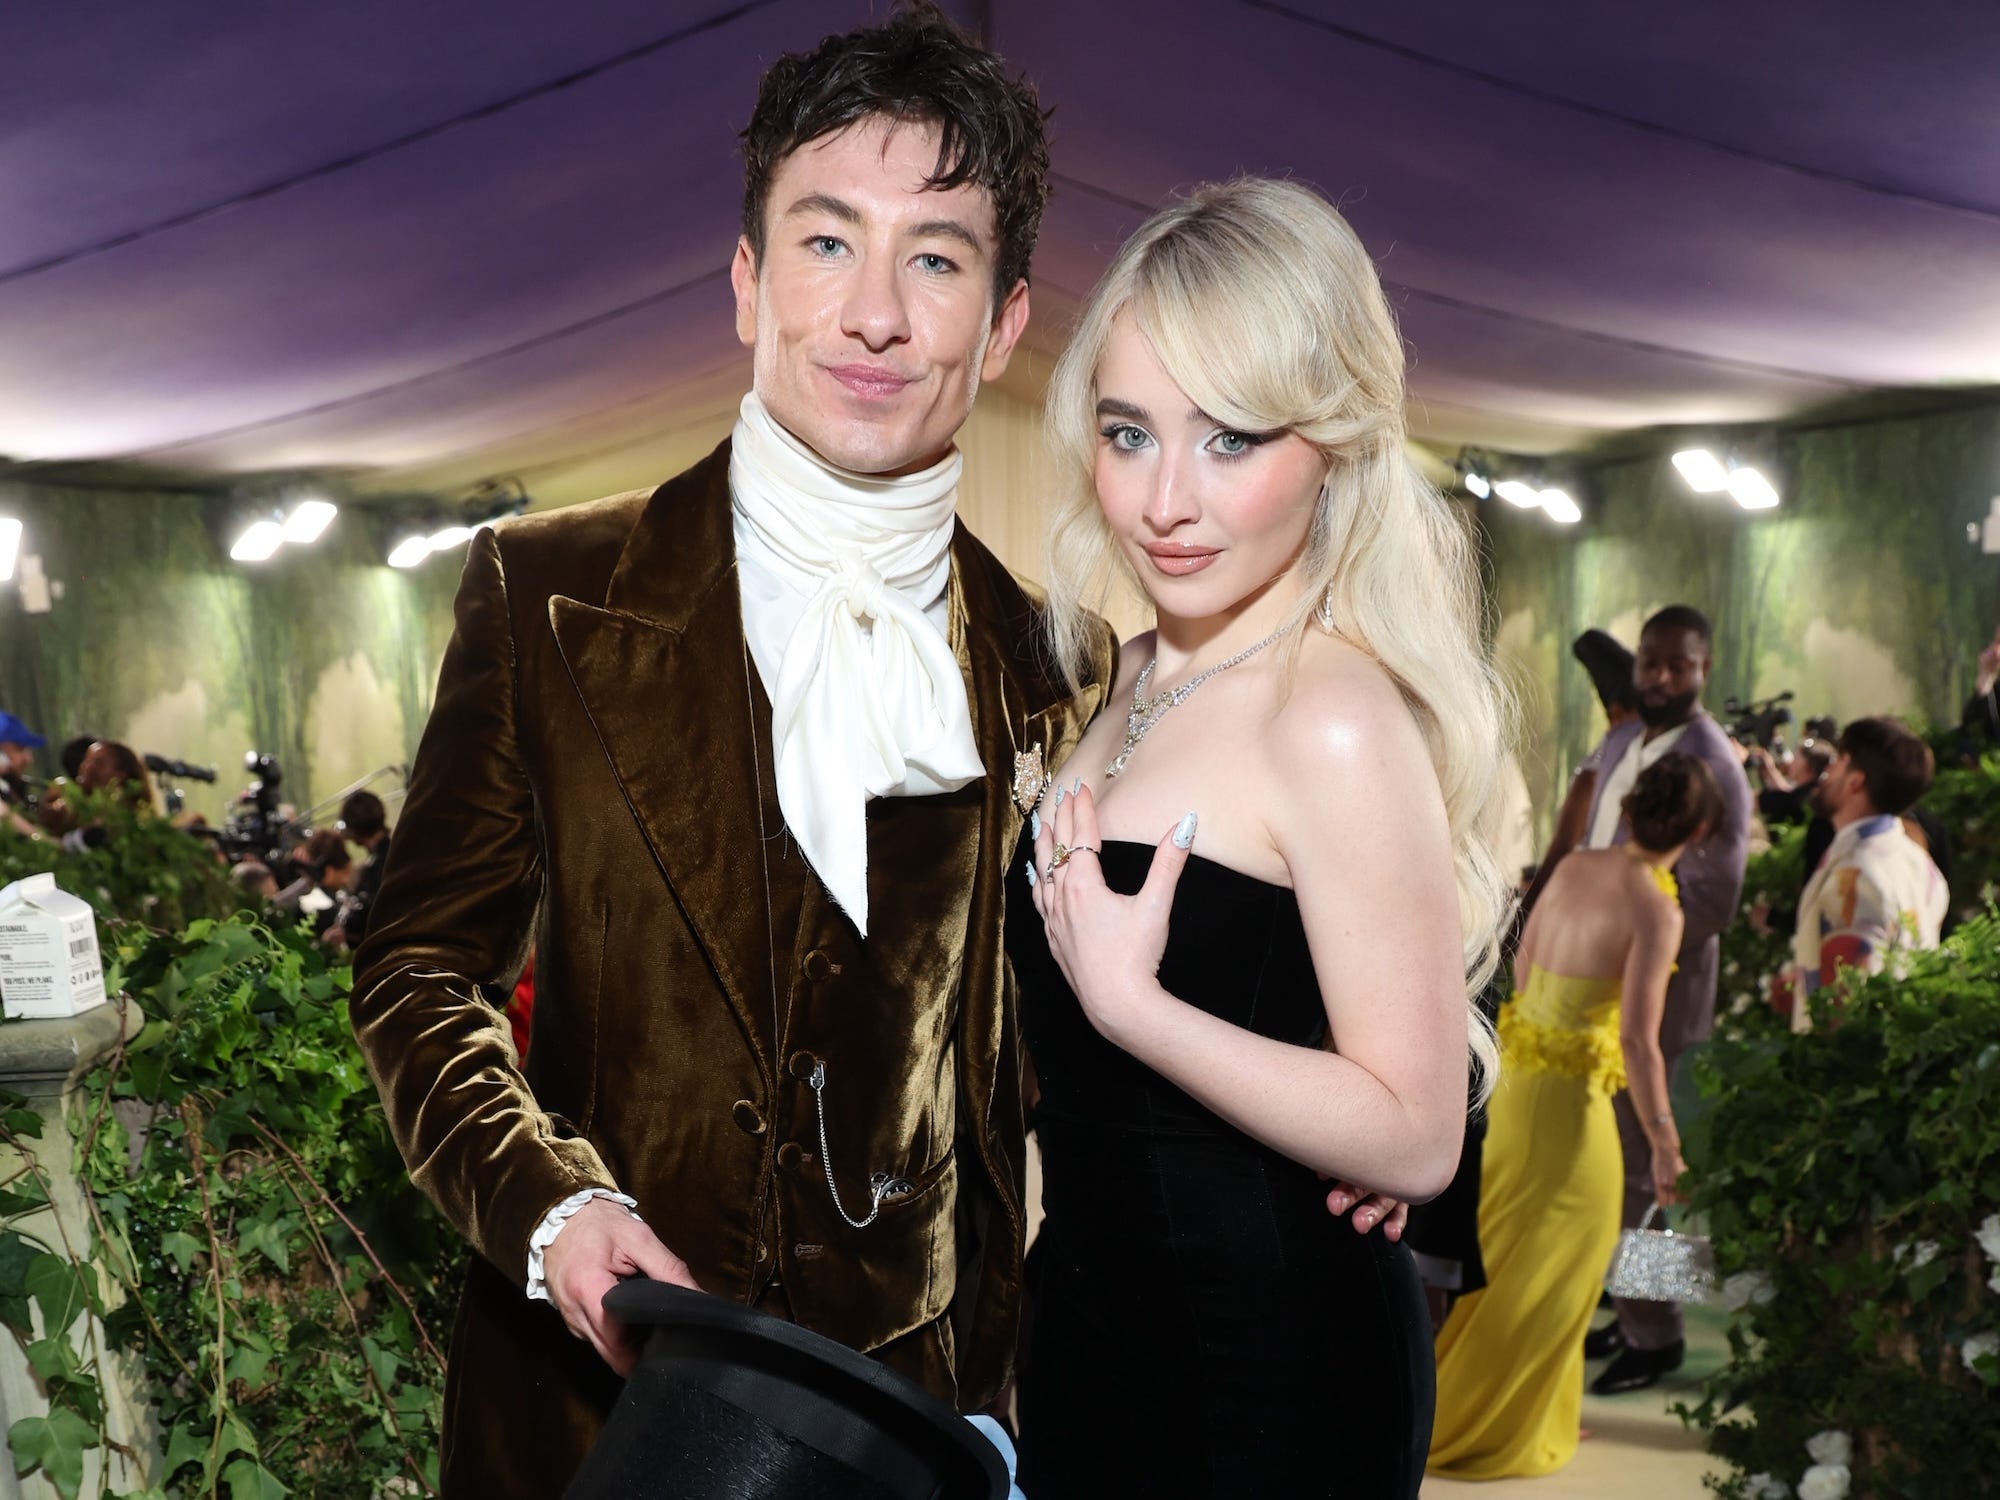 <ul class="summary-list"><li>Sabrina Carpenter seemed to confirm her relationship with Barry Keoghan in her latest music video.</li><li>Fans have speculated for months that the pair are dating after multiple red-carpet appearances together.</li><li>Here's a timeline of their relationship.</li></ul><p><a href="https://www.businessinsider.com/sabrina-carpenter-style-evolution-photos-2024-4">Sabrina Carpenter</a> seemed to take on the rumors that she is dating Barry Keoghan, featuring him in her latest music video.</p><p>On Friday, <a href="https://www.businessinsider.com/sabrina-carpenter-because-i-liked-a-boy-lyrics-joshua-bassett-2022-7">Carpenter</a> released "Please Please Please," a single from her upcoming album "Short n' Sweet."</p><p>In the song's video, Carpenter falls for a convict, played by <a href="https://www.businessinsider.com/barry-keoghans-roles-ranked-saltburn-dunkirk-eternals-2024-1">Keoghan</a>, who keeps committing crimes and getting arrested.</p><p>Though the pair have been rumored to be dating for months, it is the first time Carpenter publicly nodded at a relationship.</p><p>Representatives for Keoghan and Carpenter did not immediately respond to a comment request from Business Insider.</p><p>In 2024, both <a href="https://www.businessinsider.com/sabrina-carpenter-feathers-music-video-catholic-church-scandal-jesus-2023-11">Carpenter</a> and Keoghan had an abrupt rise in popularity.</p><p>Keoghan's leading role in 2023's "Saltburn" brought him to a new level of fame. Carpenter's star has risen on the back of slots at Taylor Swift's Eras Tour and Coachella, plus her hit summer song "<a href="https://www.businessinsider.com/sabrina-carpenter-espresso-song-of-summer-value-hit-2024-4">Espresso</a>."</p><p>Here's what to know about the pair.</p><div class="read-original">Read the original article on <a href="https://www.businessinsider.com/barry-keoghan-and-sabrina-carpenters-relationship-timeline-photos-2024-6">Business Insider</a></div>